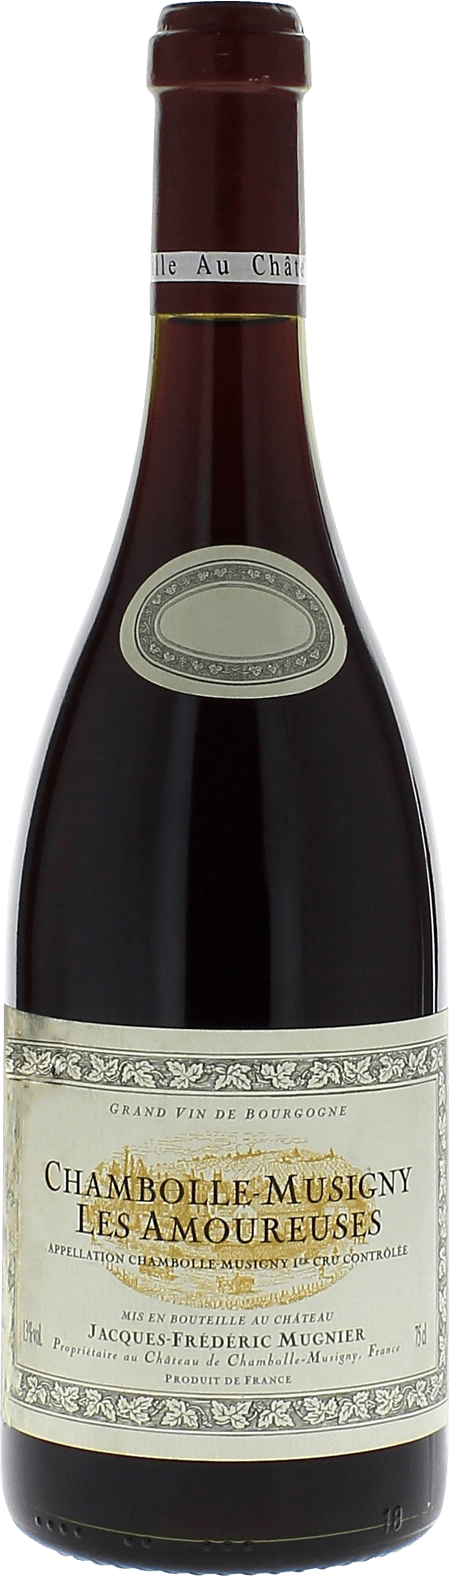 Chambolle musigny 1er cru les amoureuses 2015 Domaine MUGNIER Jacques Frederic, Bourgogne rouge